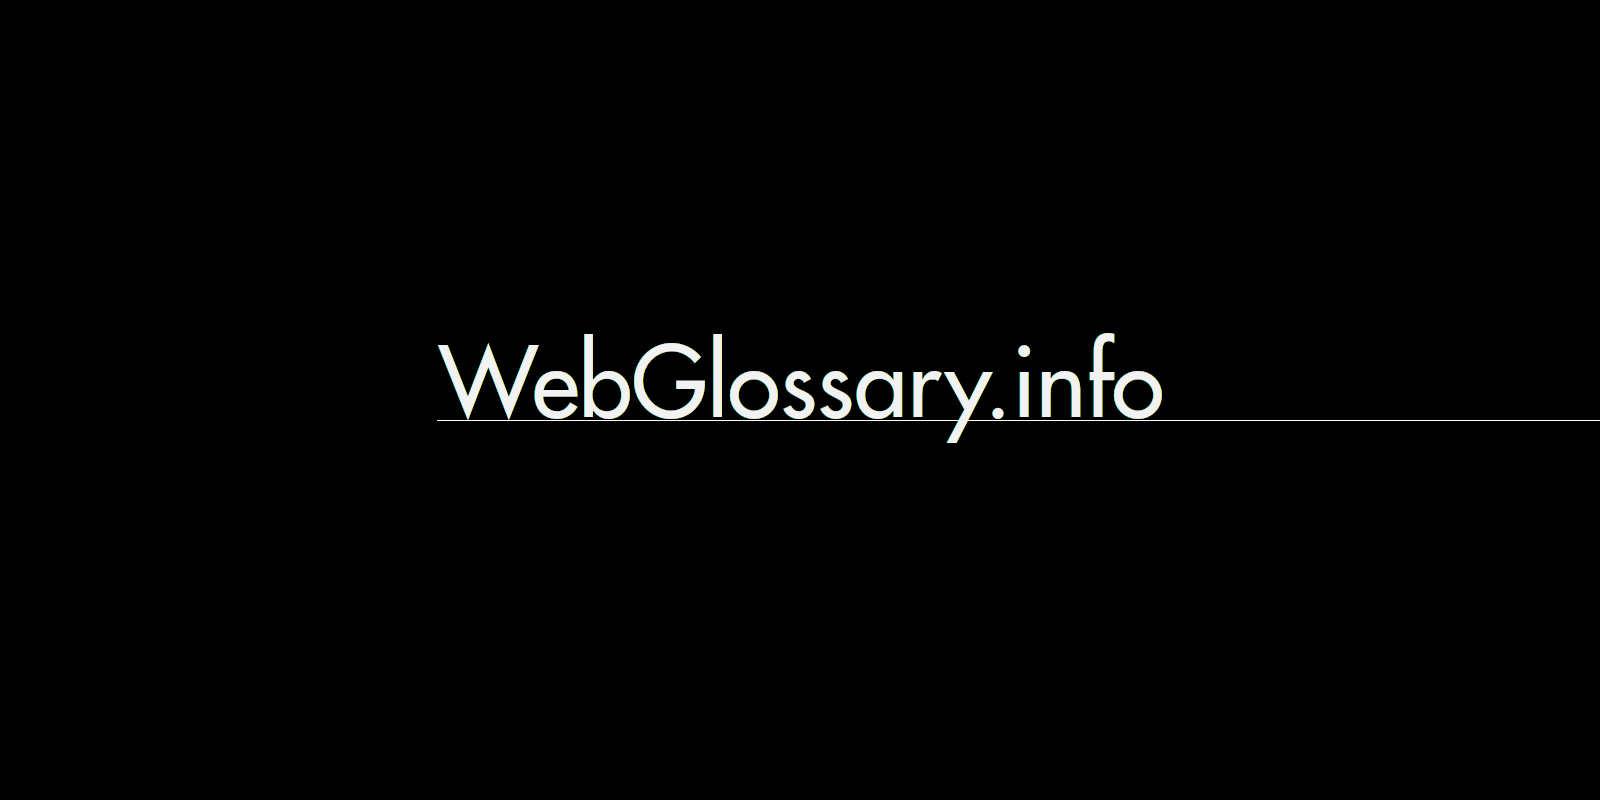 The all new WebGlossary.info.